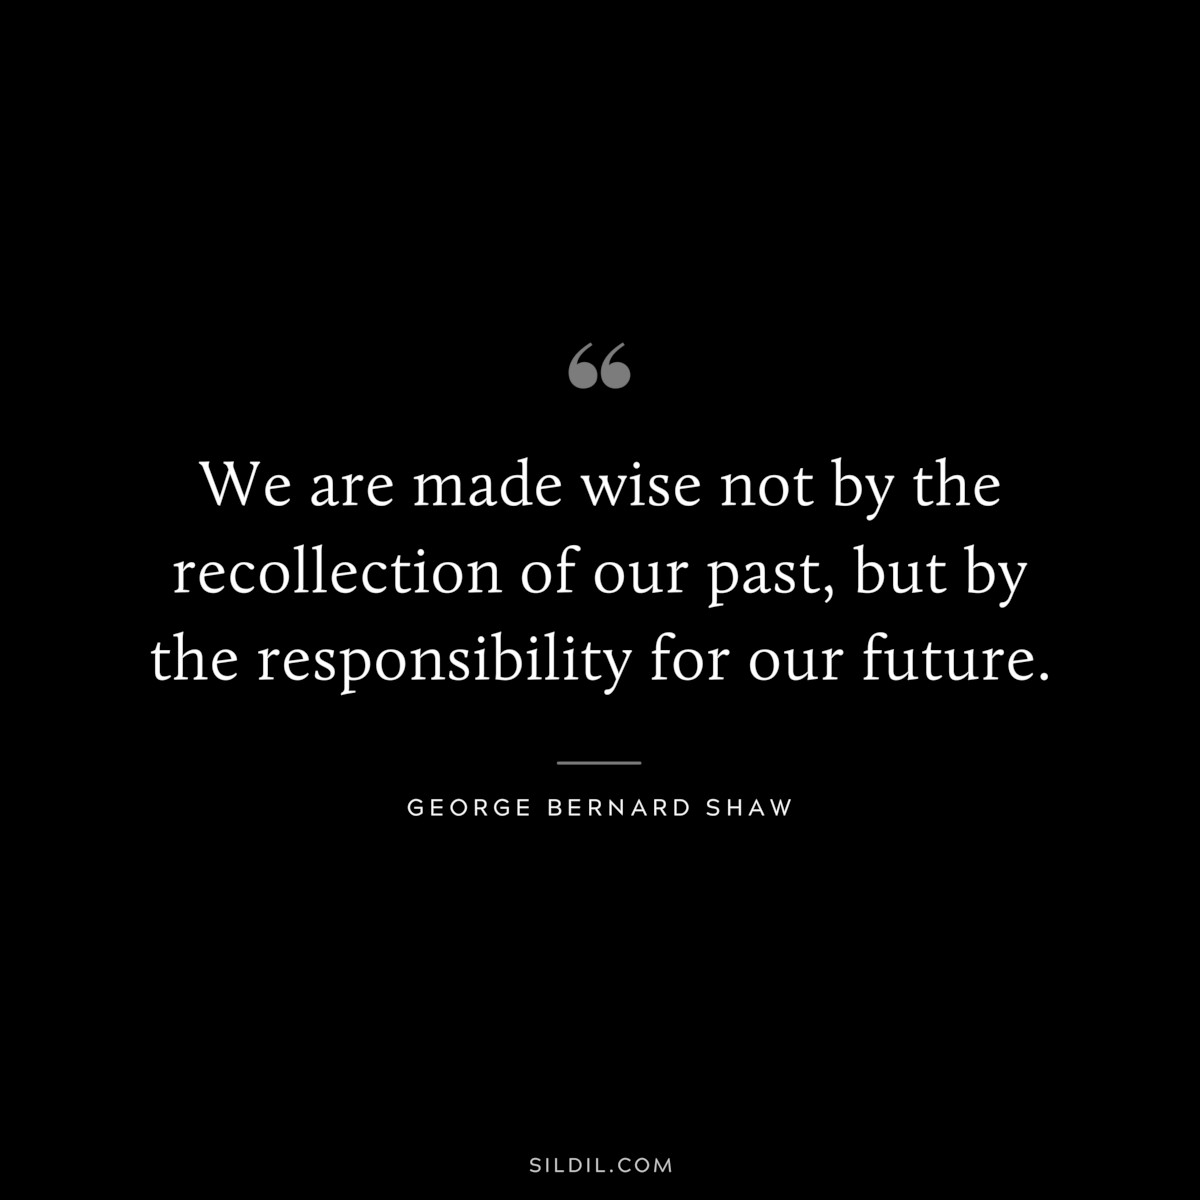 We are made wise not by the recollection of our past, but by the responsibility for our future. ― George Bernard Shaw